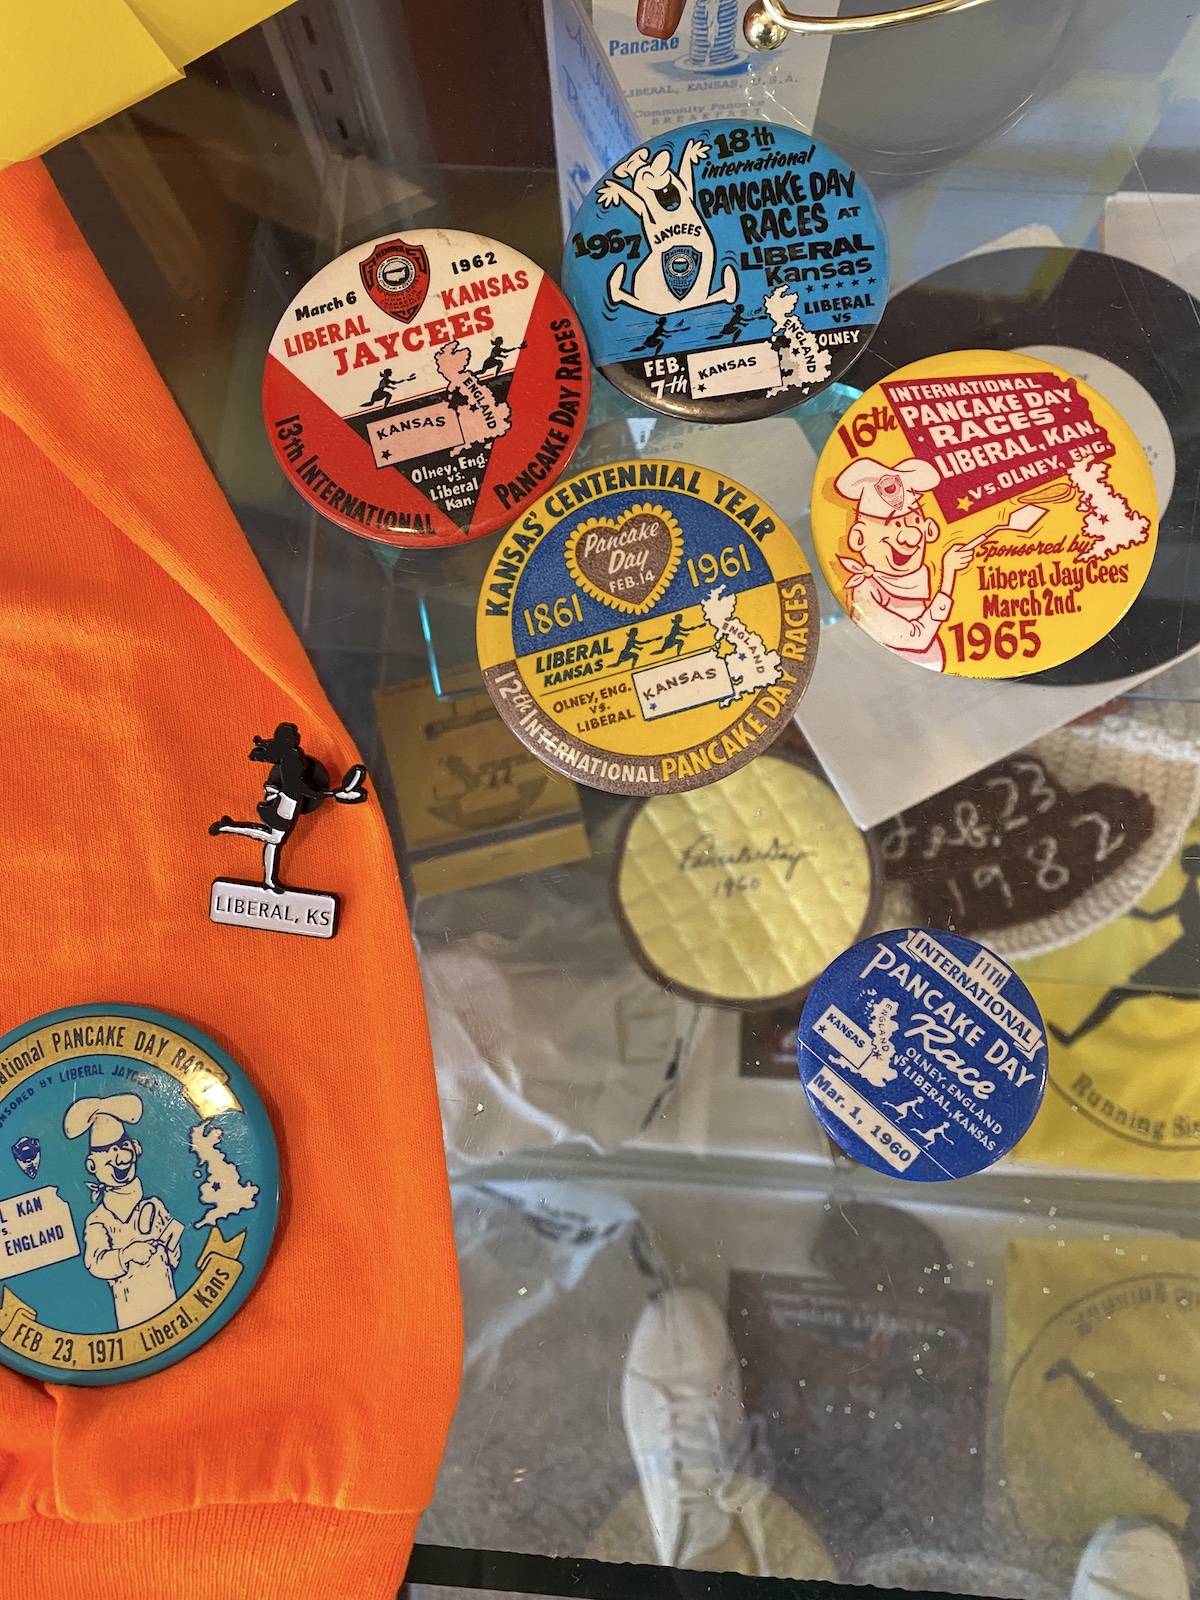 Promotional buttons and memorabilia from International Pancake Day at the International Pancake Day Hall of Fame in Liberal, Kansas